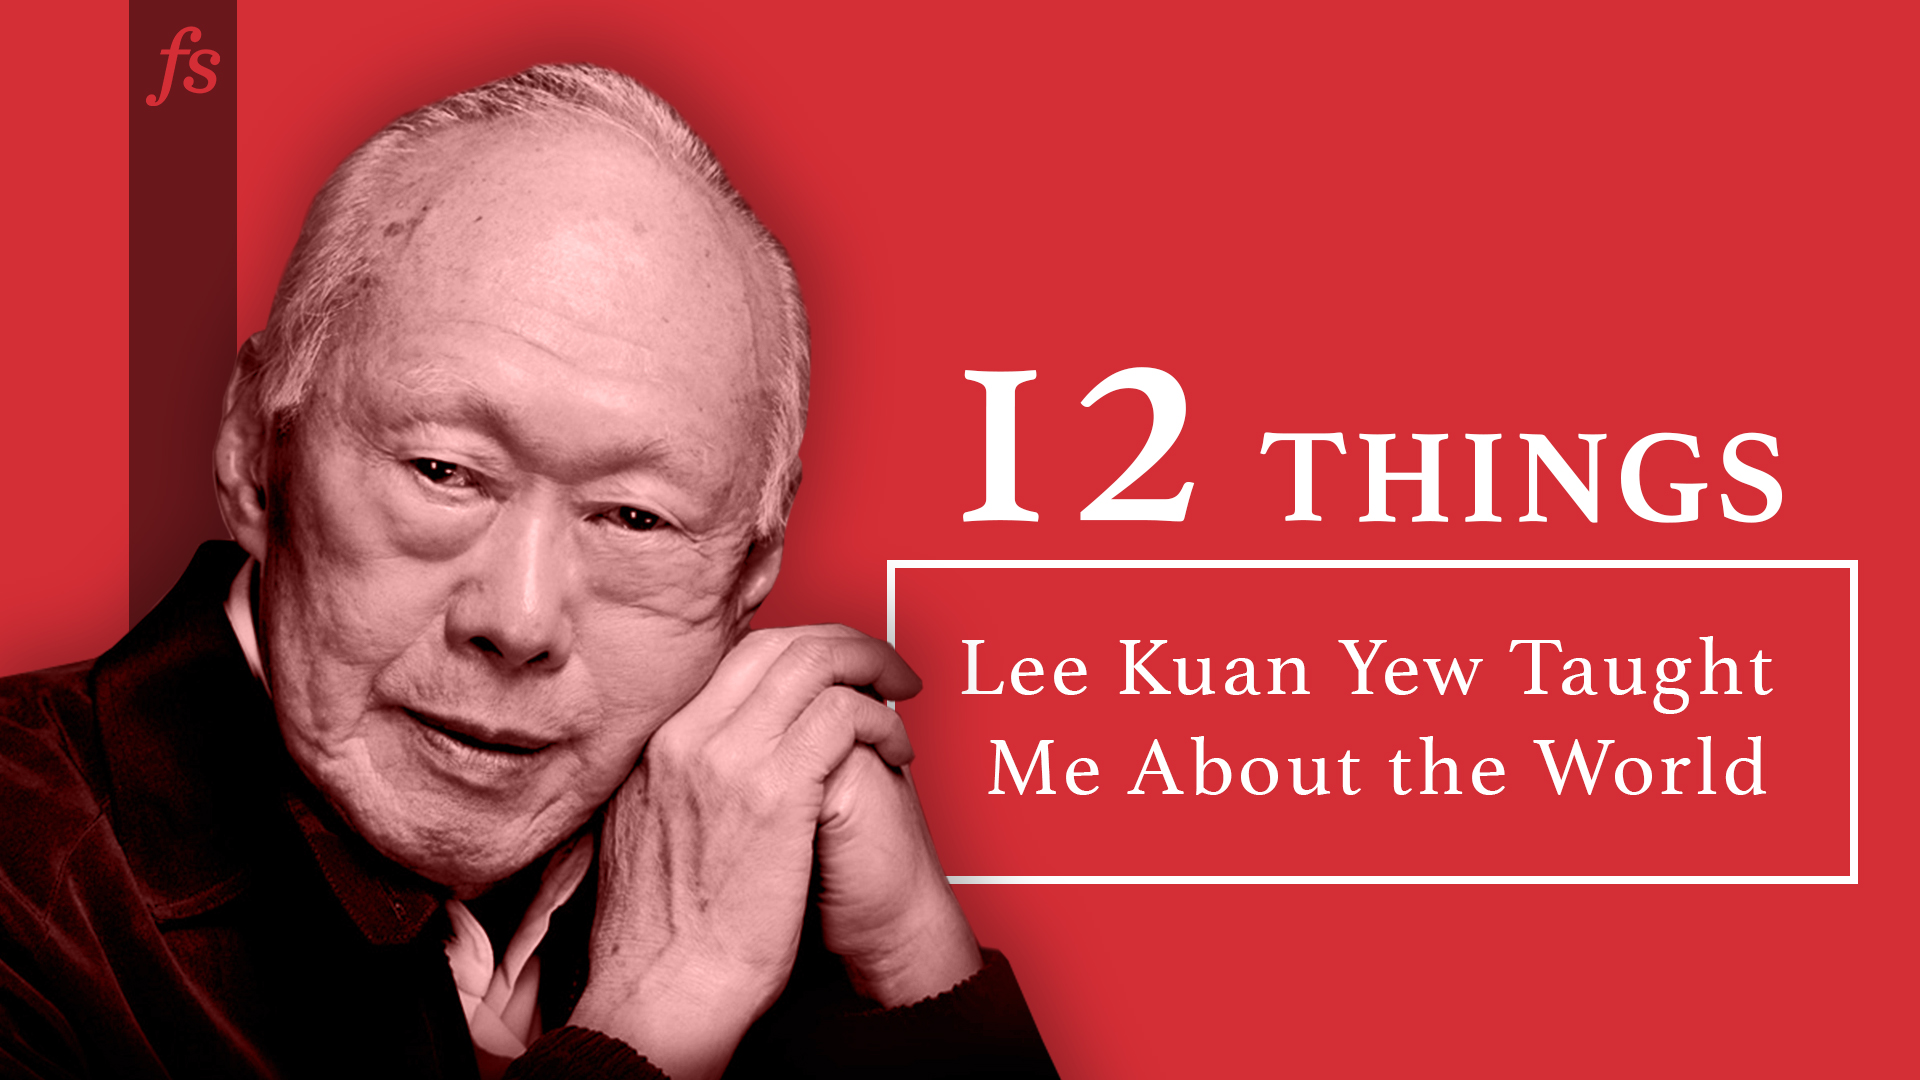 12 Things Lee Kuan Yew Taught Me About the World